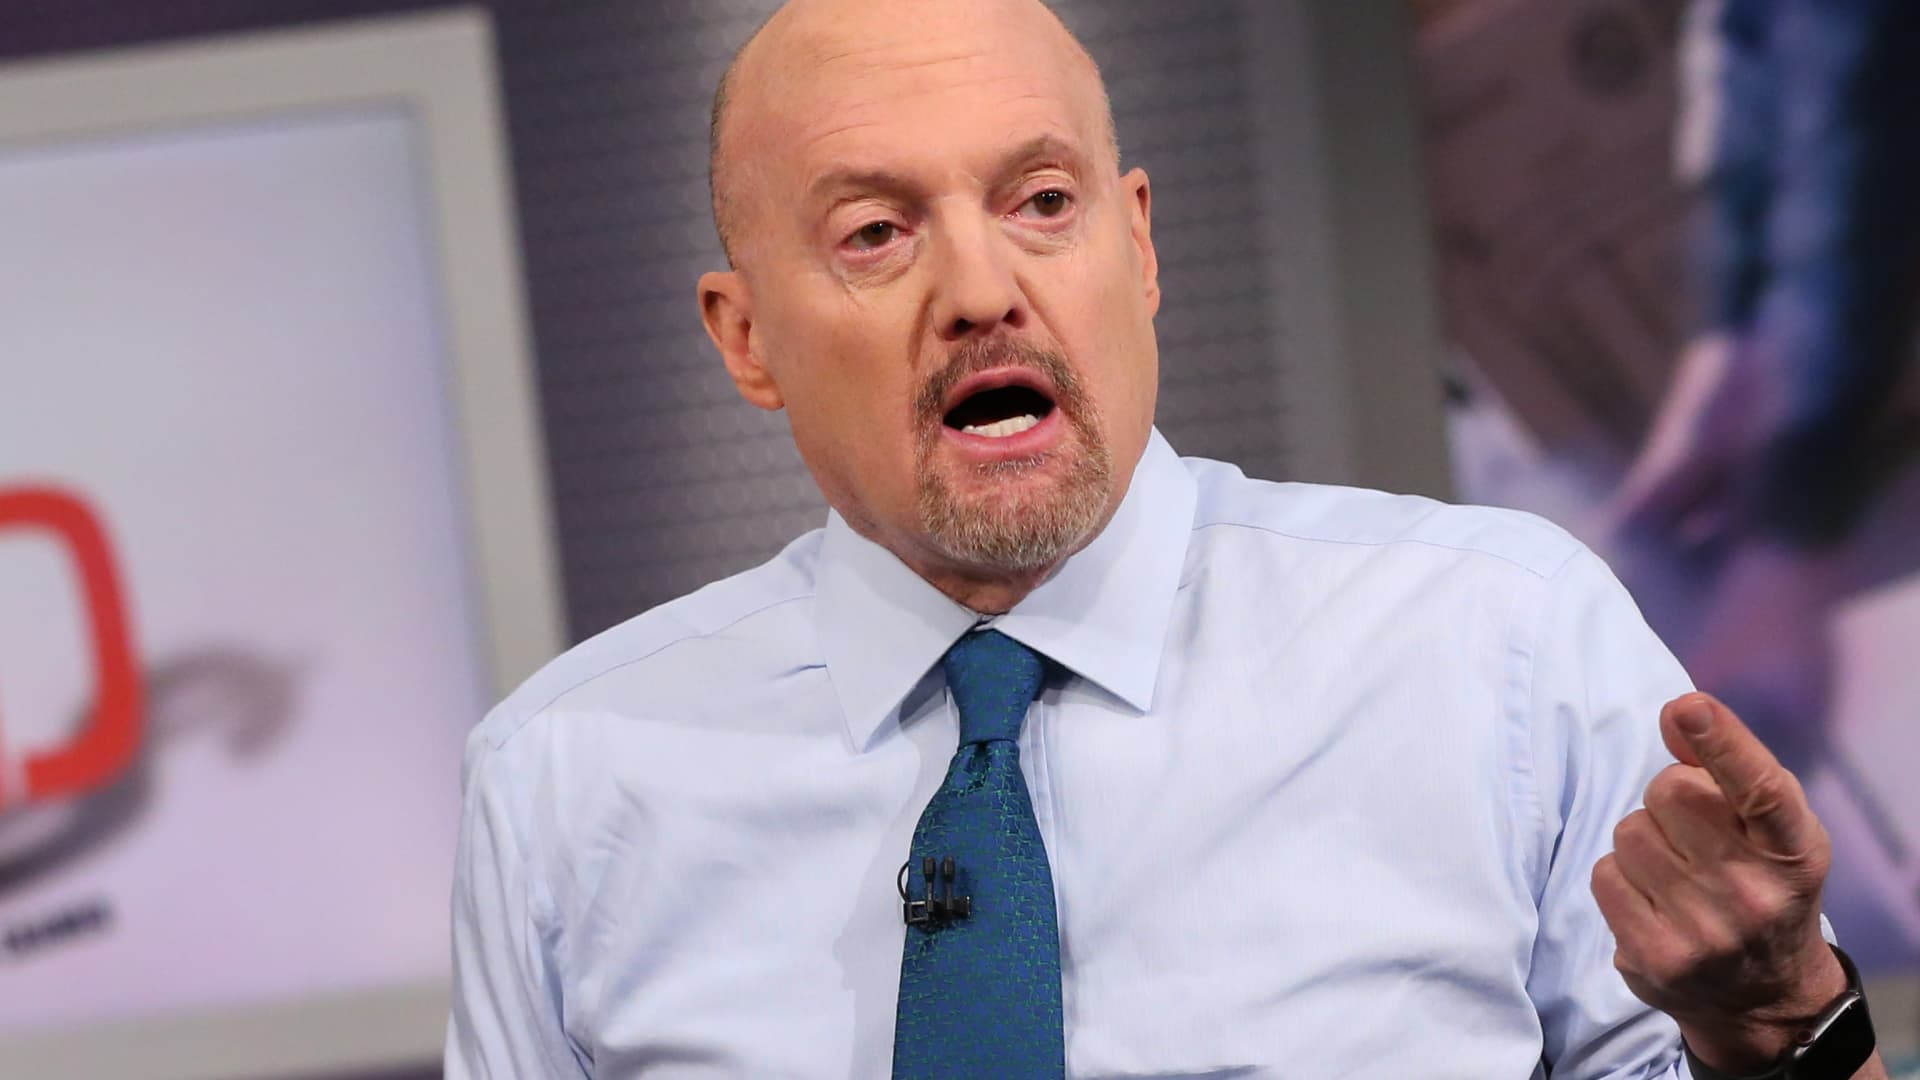 Jim Cramer warns even high quality low price-to-earnings stocks could get beaten down by a recession